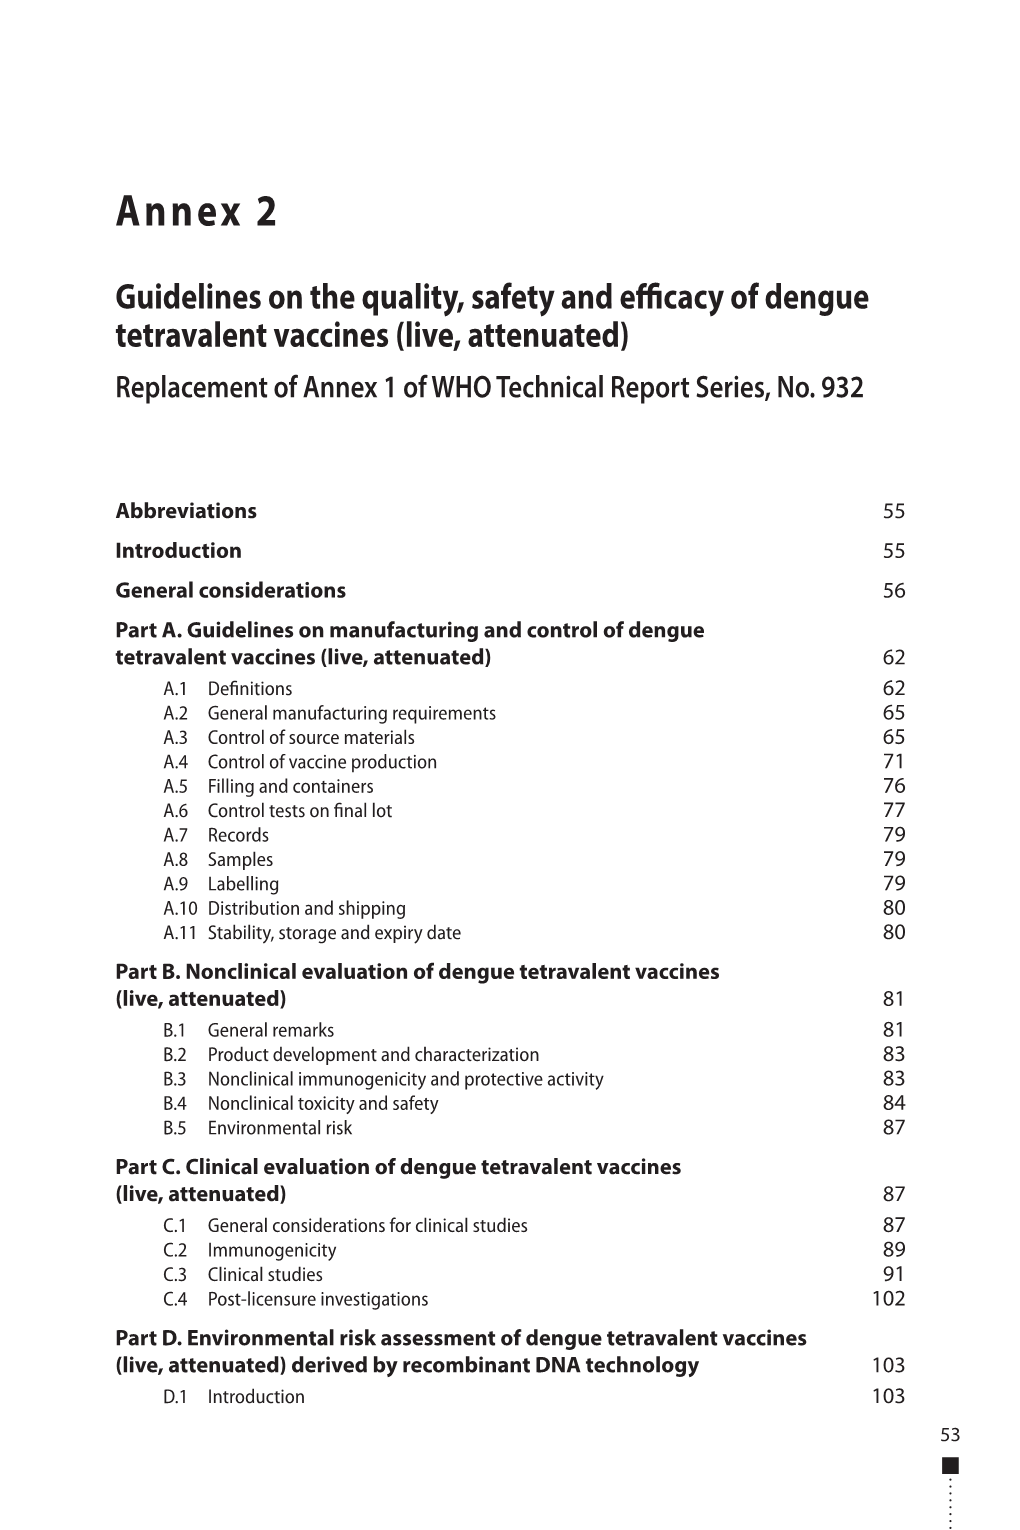 Guidelines on the Quality, Safety and Efficacy of Dengue Tetravalent Vaccines (Live, Attenuated) Replacement of Annex 1 of WHO Technical Report Series, No